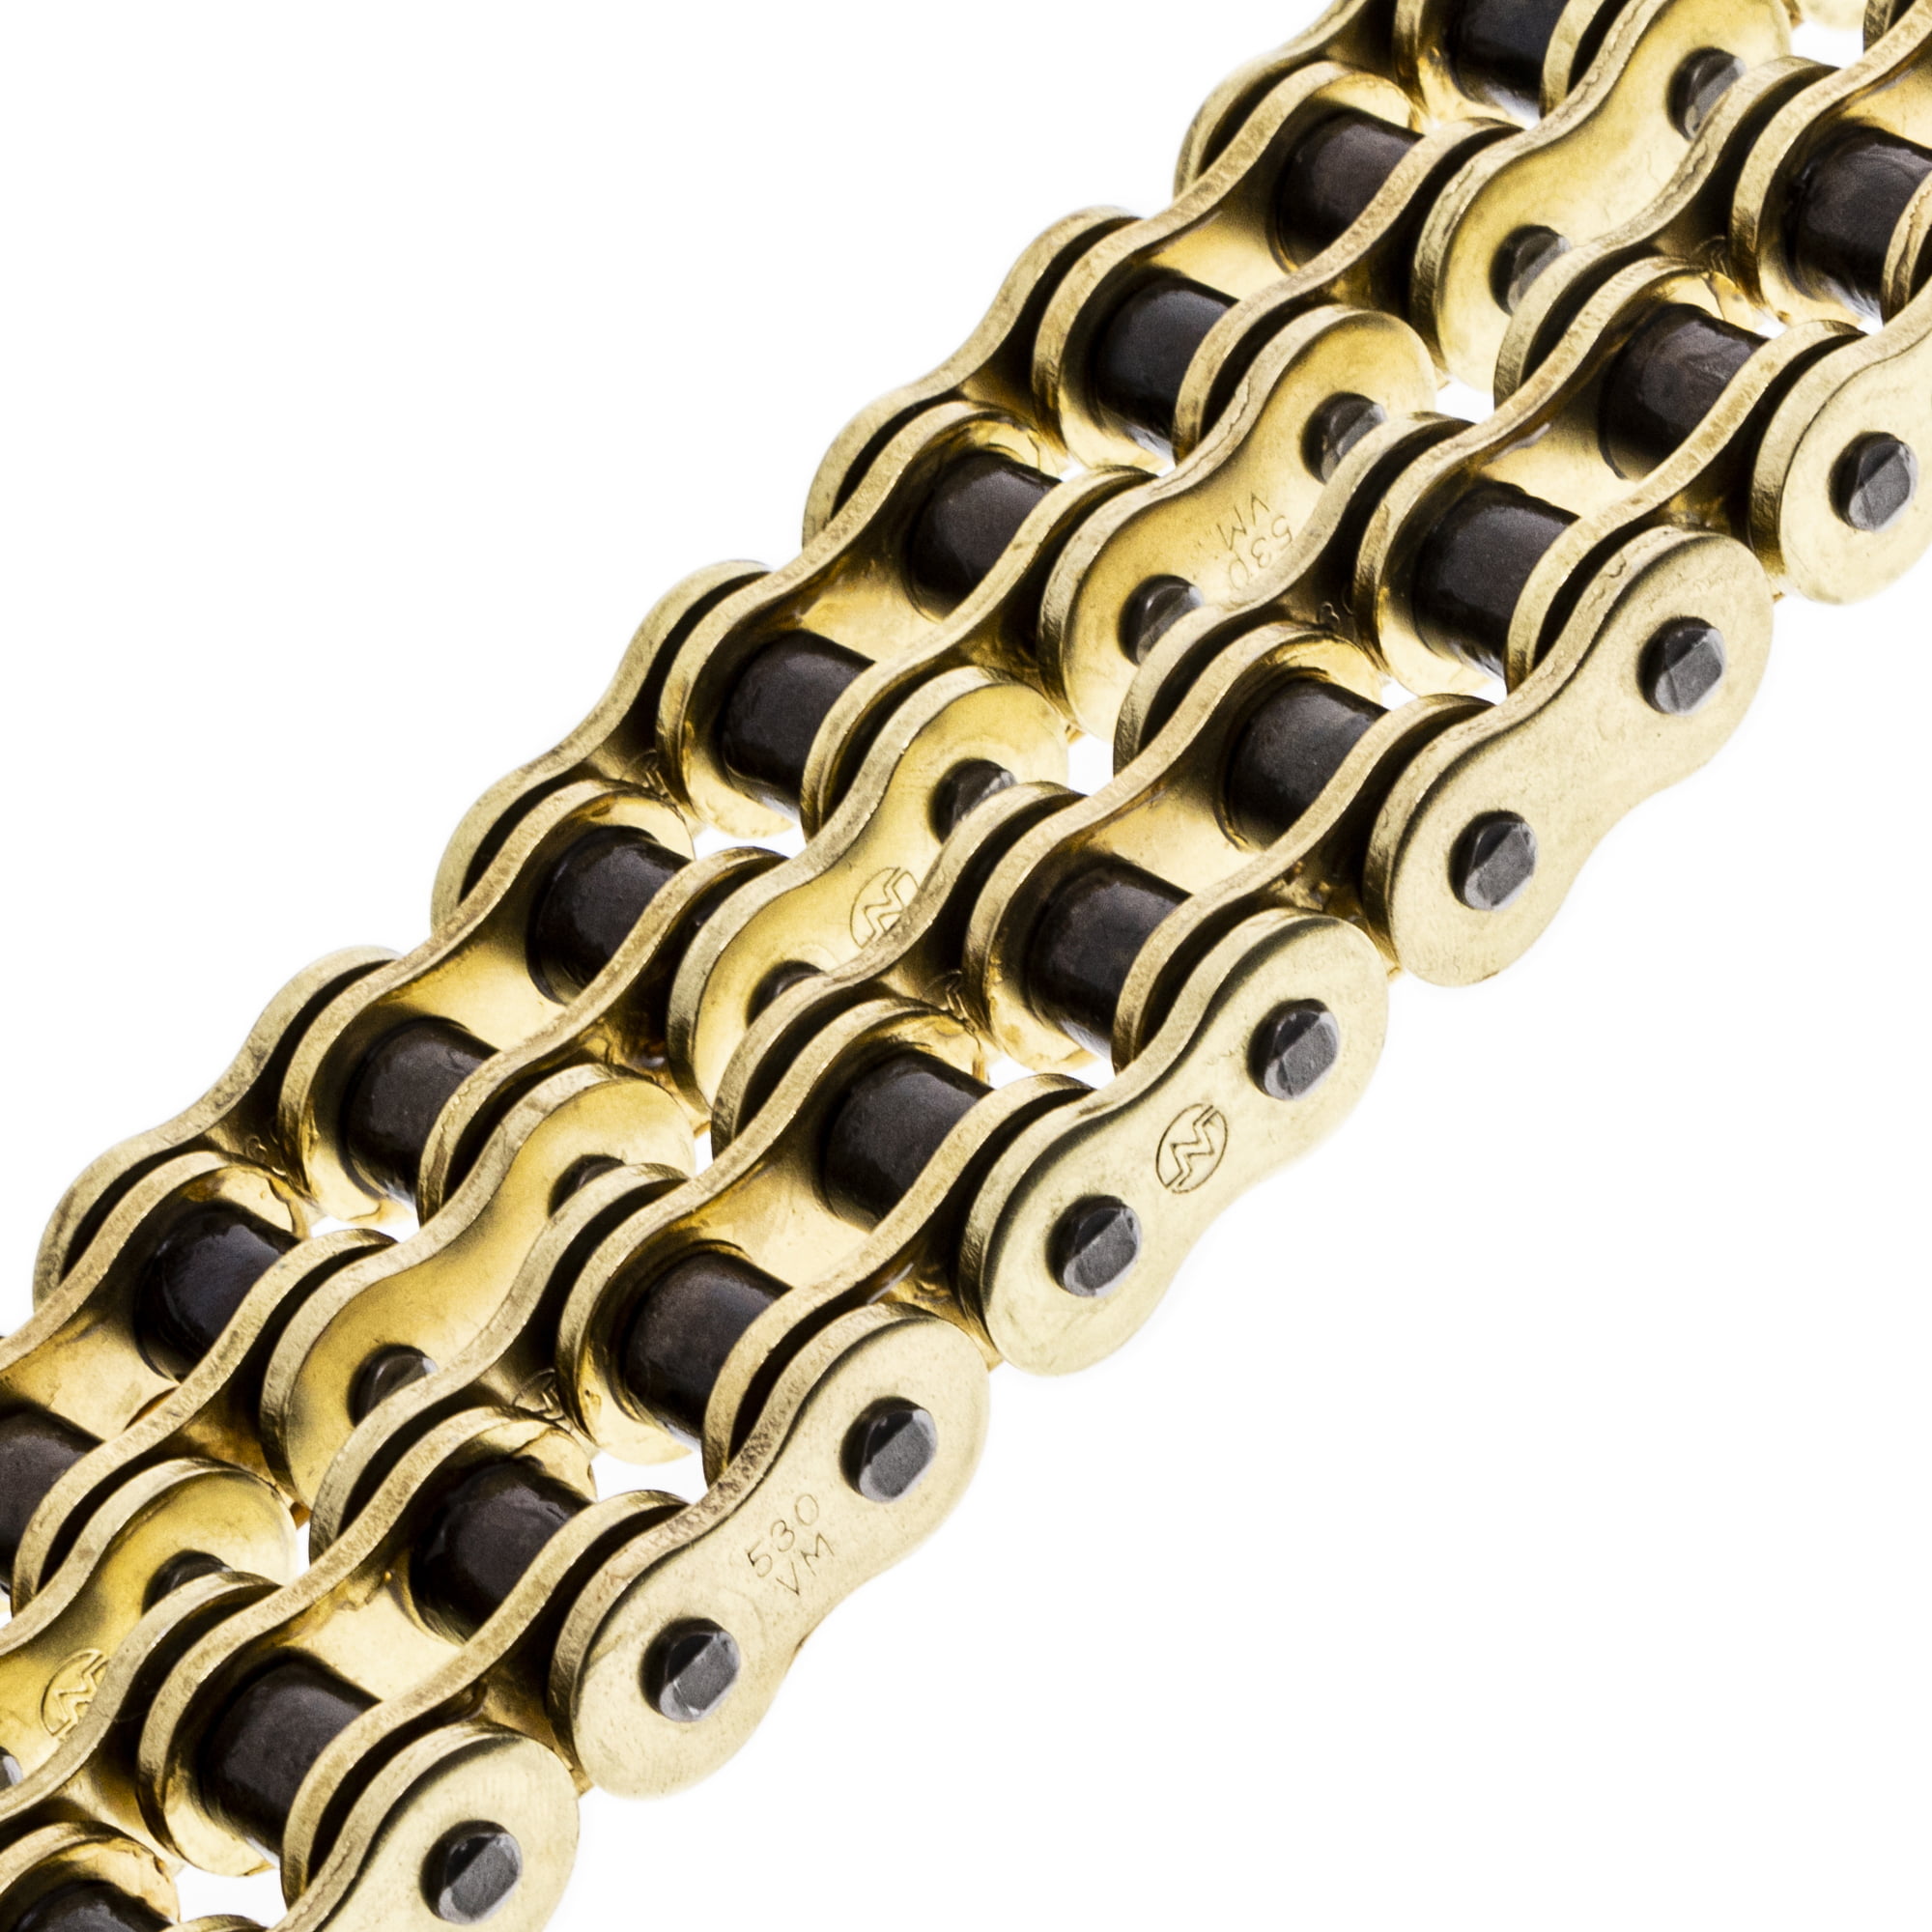 NICHE 530 Drive Chain 116 Links O-Ring With Connecting Master Link Motorcycle